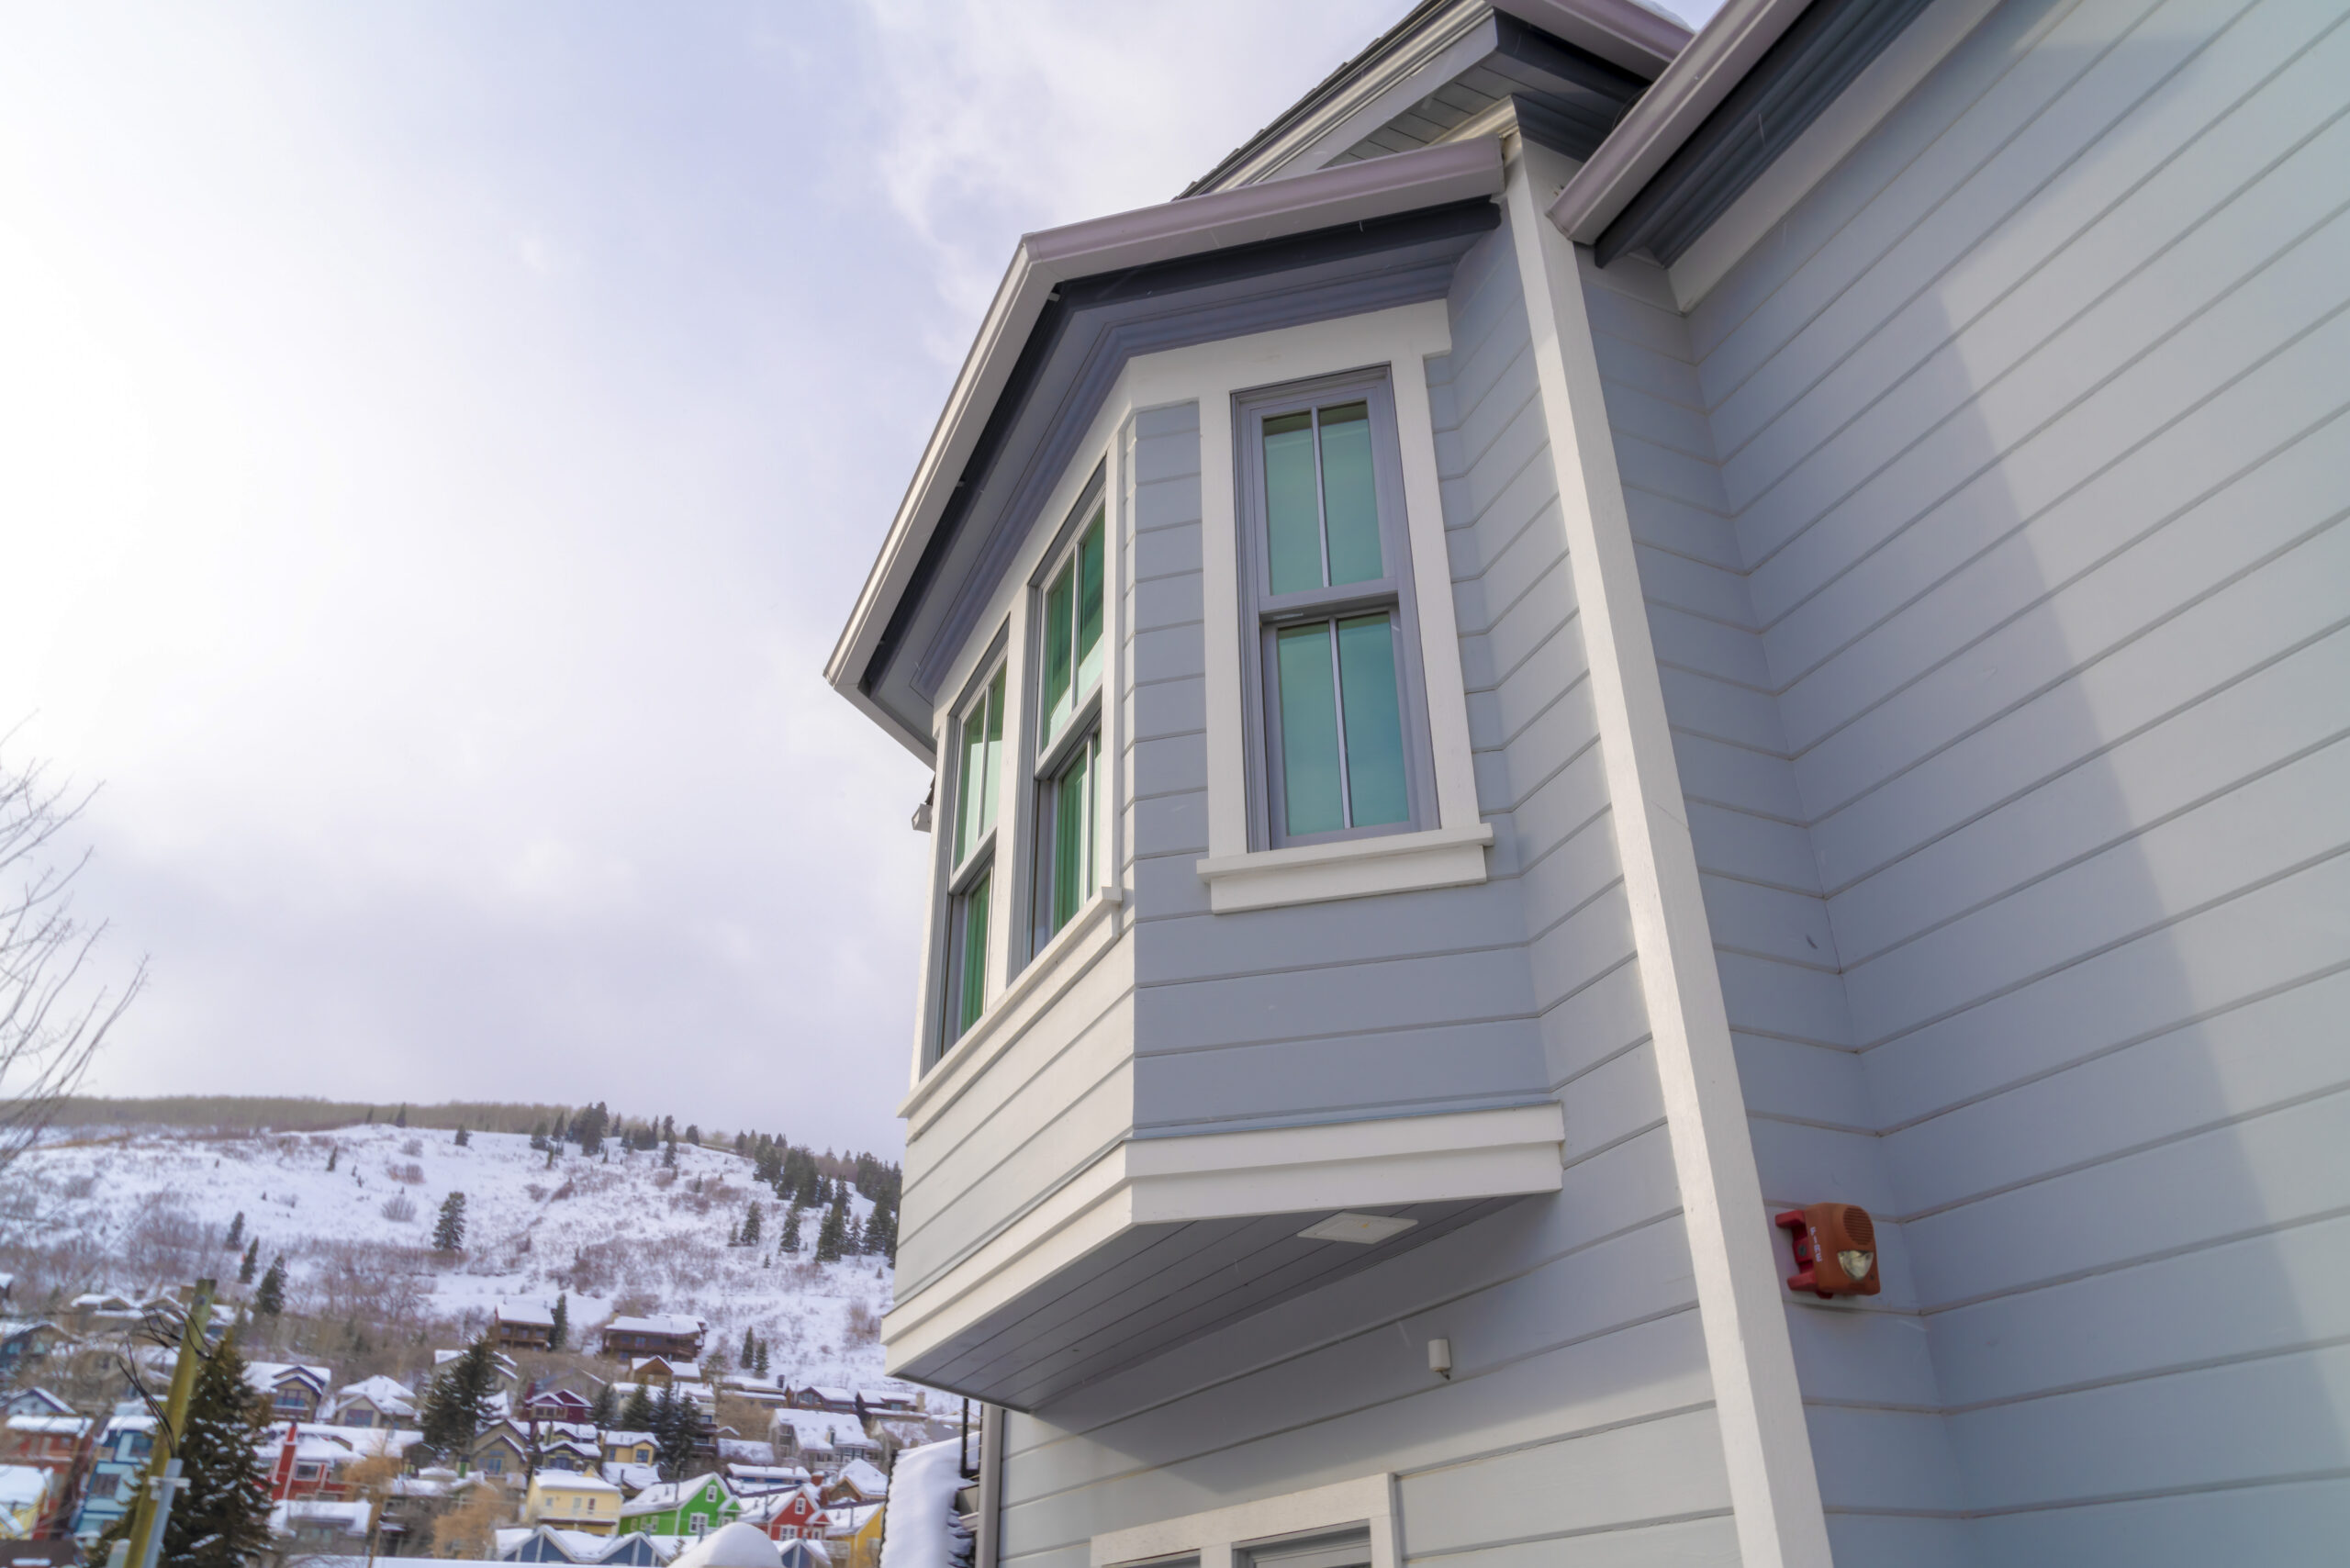 Home exterior in Park City Utah with bay window and gray horizontal wall siding